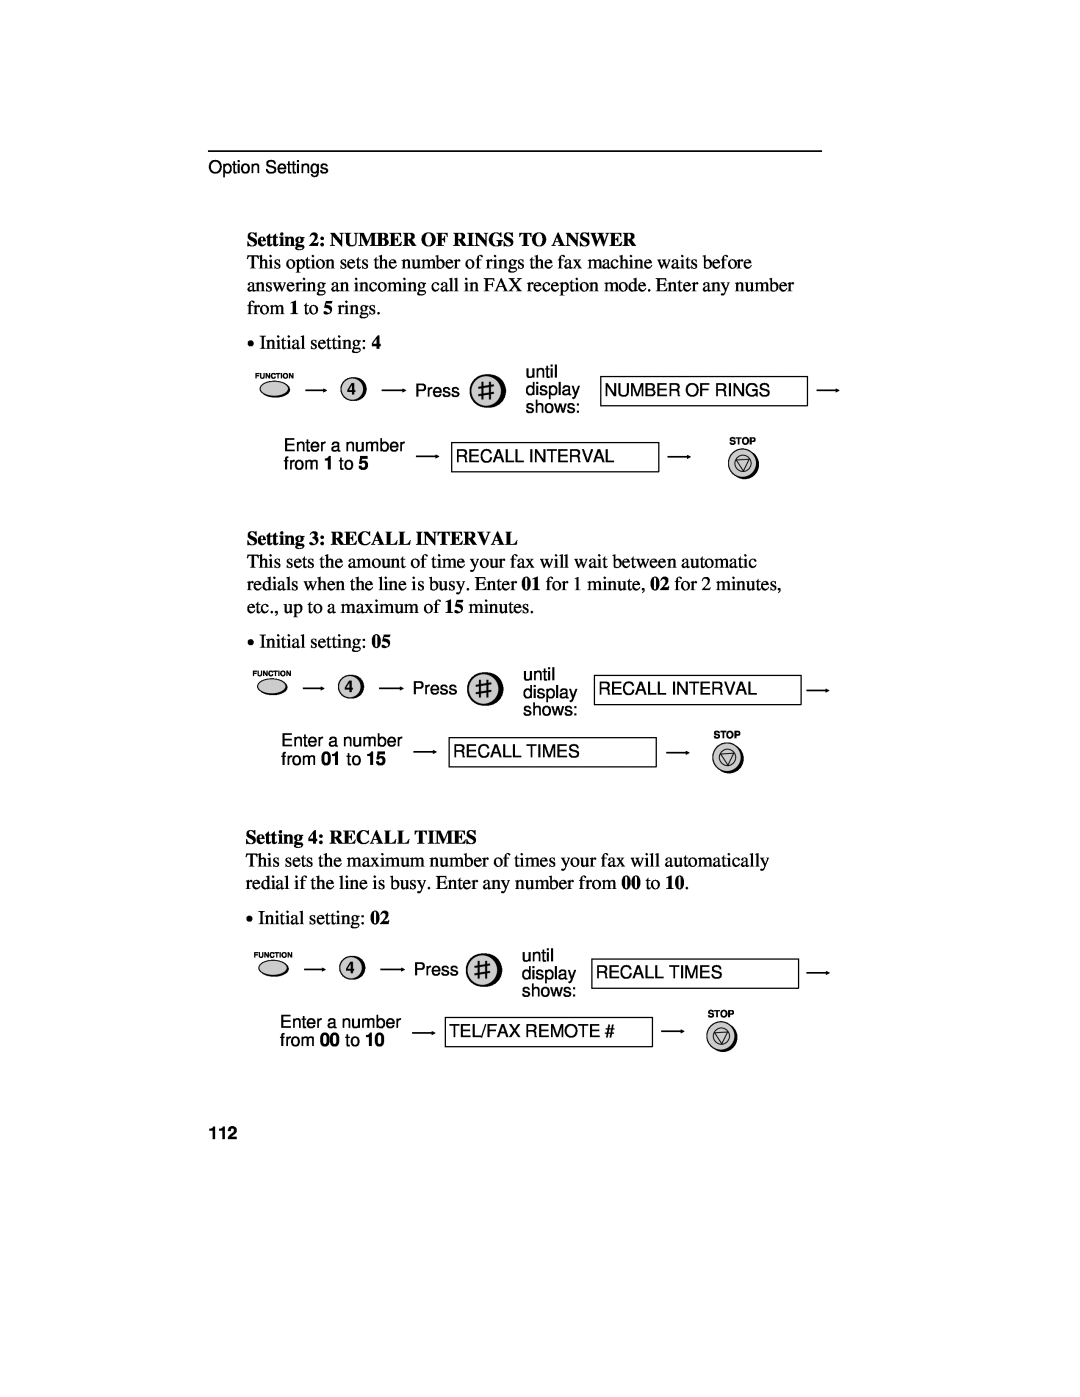 Sharp UX-460 operation manual Setting 2 NUMBER OF RINGS TO ANSWER, Setting 3 RECALL INTERVAL, Setting 4 RECALL TIMES 